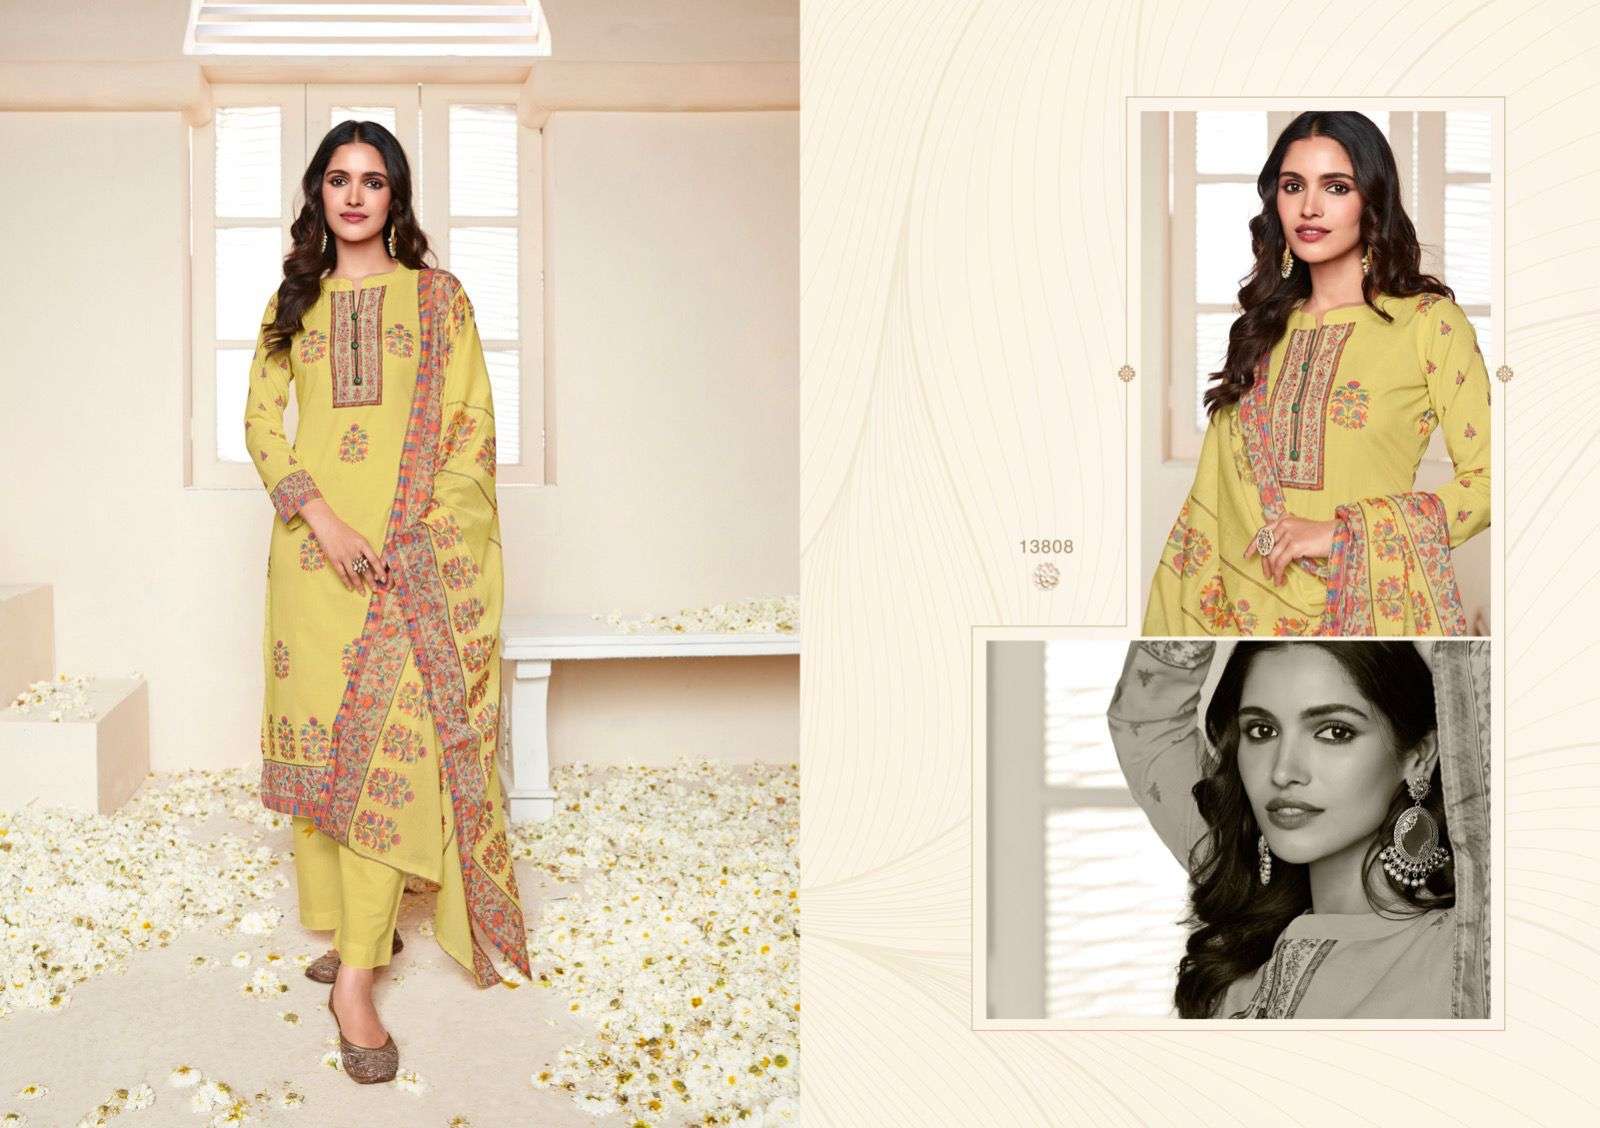 Fancy Exclusive Party Wear Suit at Rs 1,380 / Piece in Surat